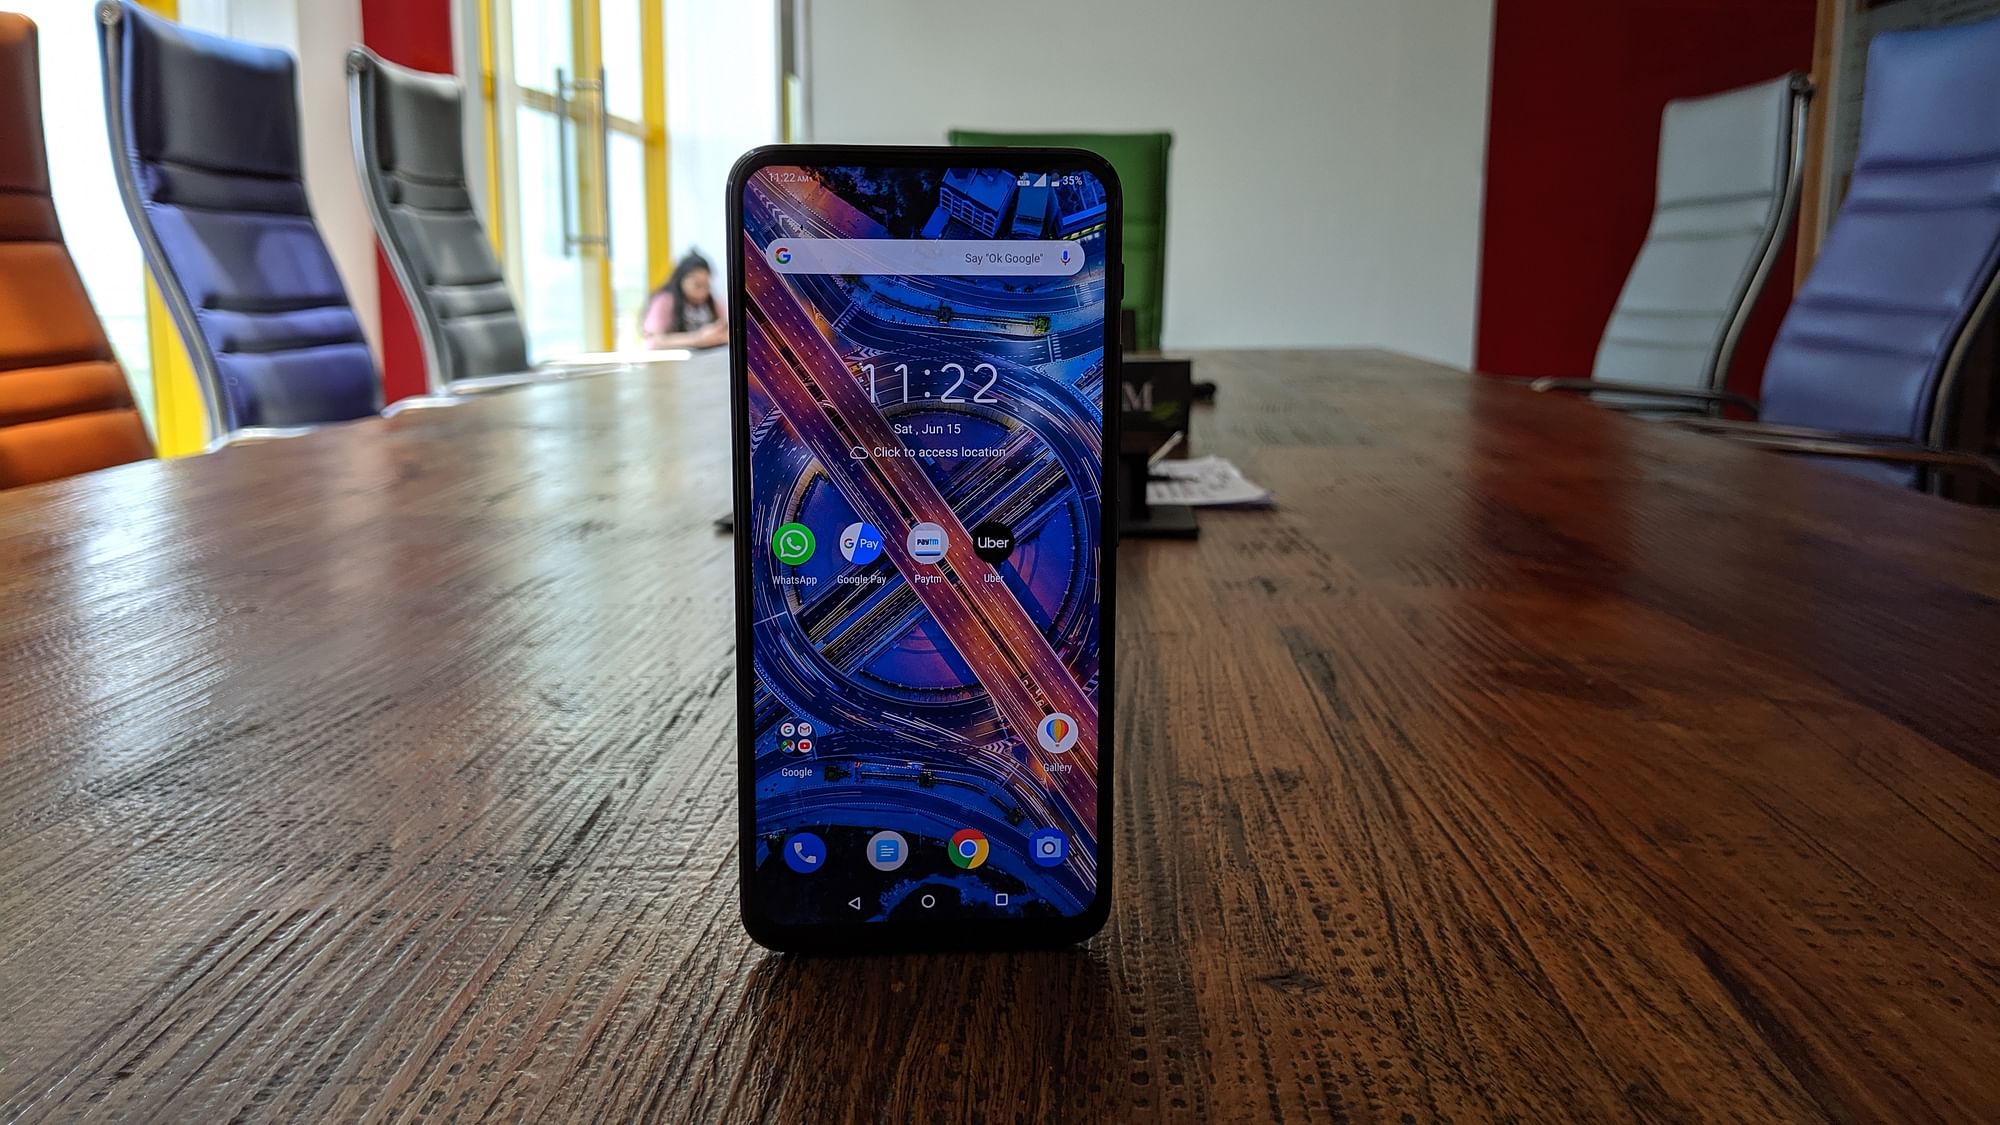 Asus 6Z is going up against some really good phones in the market.